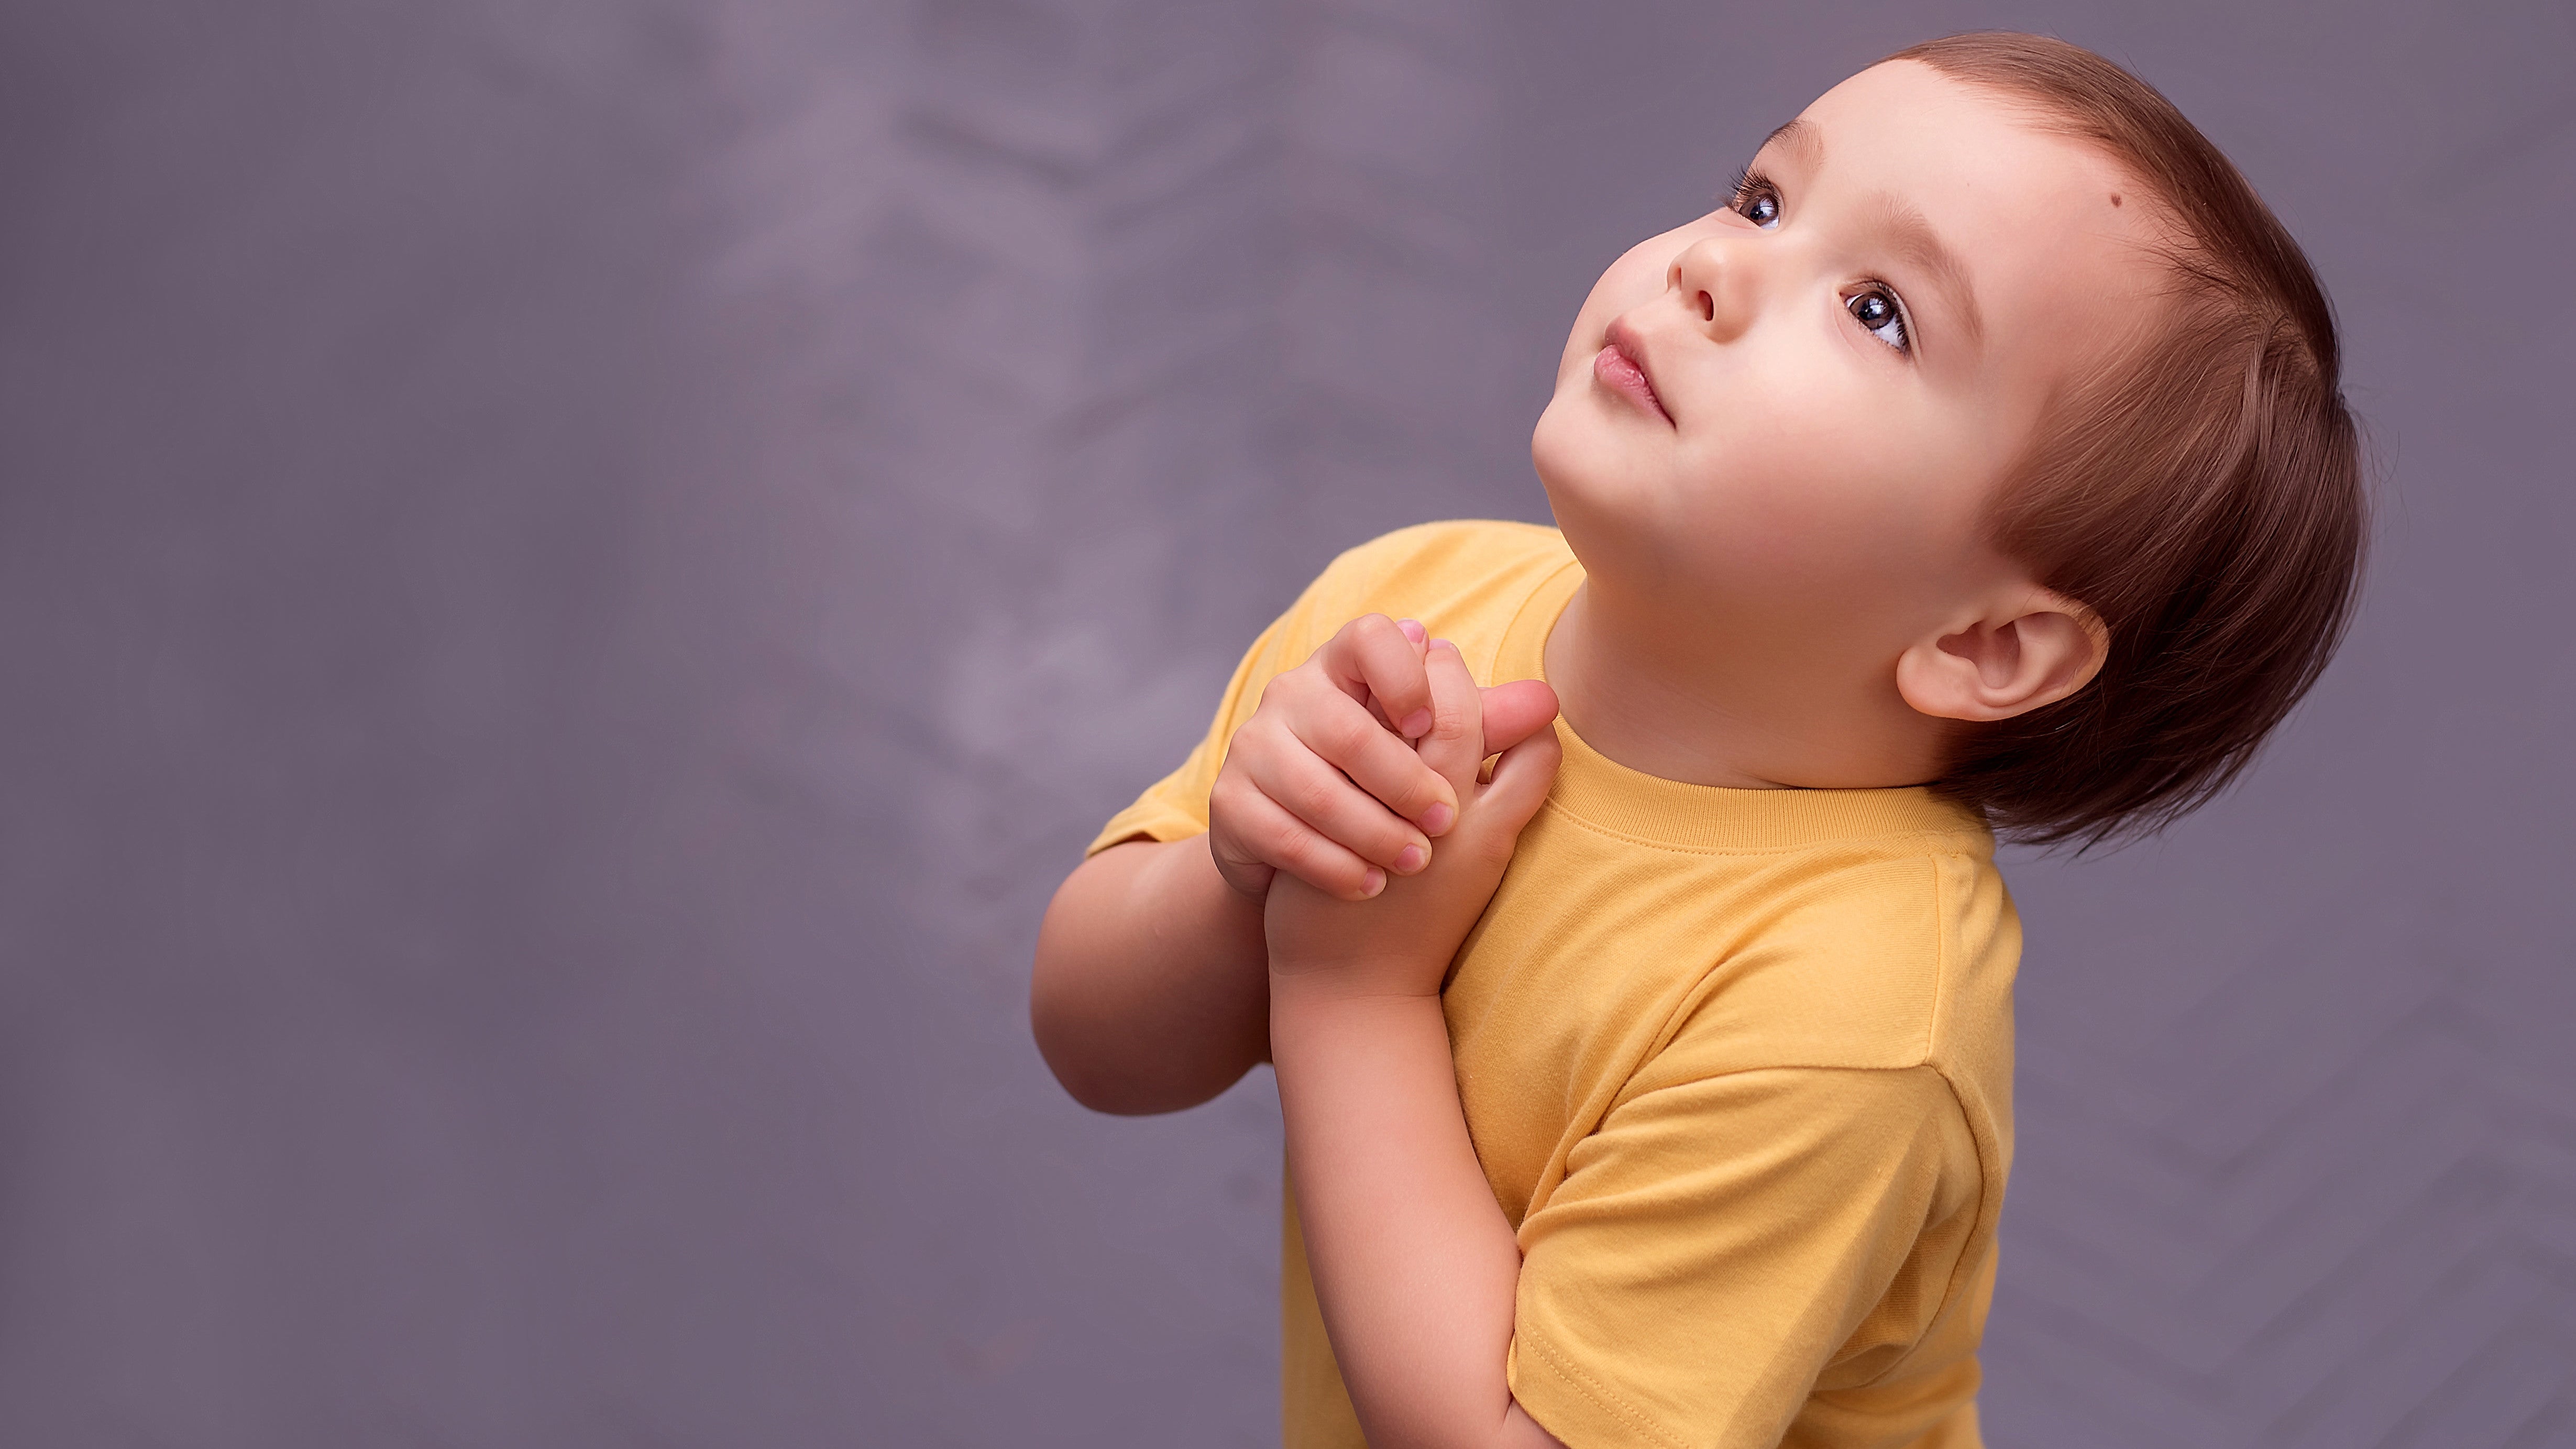 What To Tell Your Toddler Instead Of ‘No’